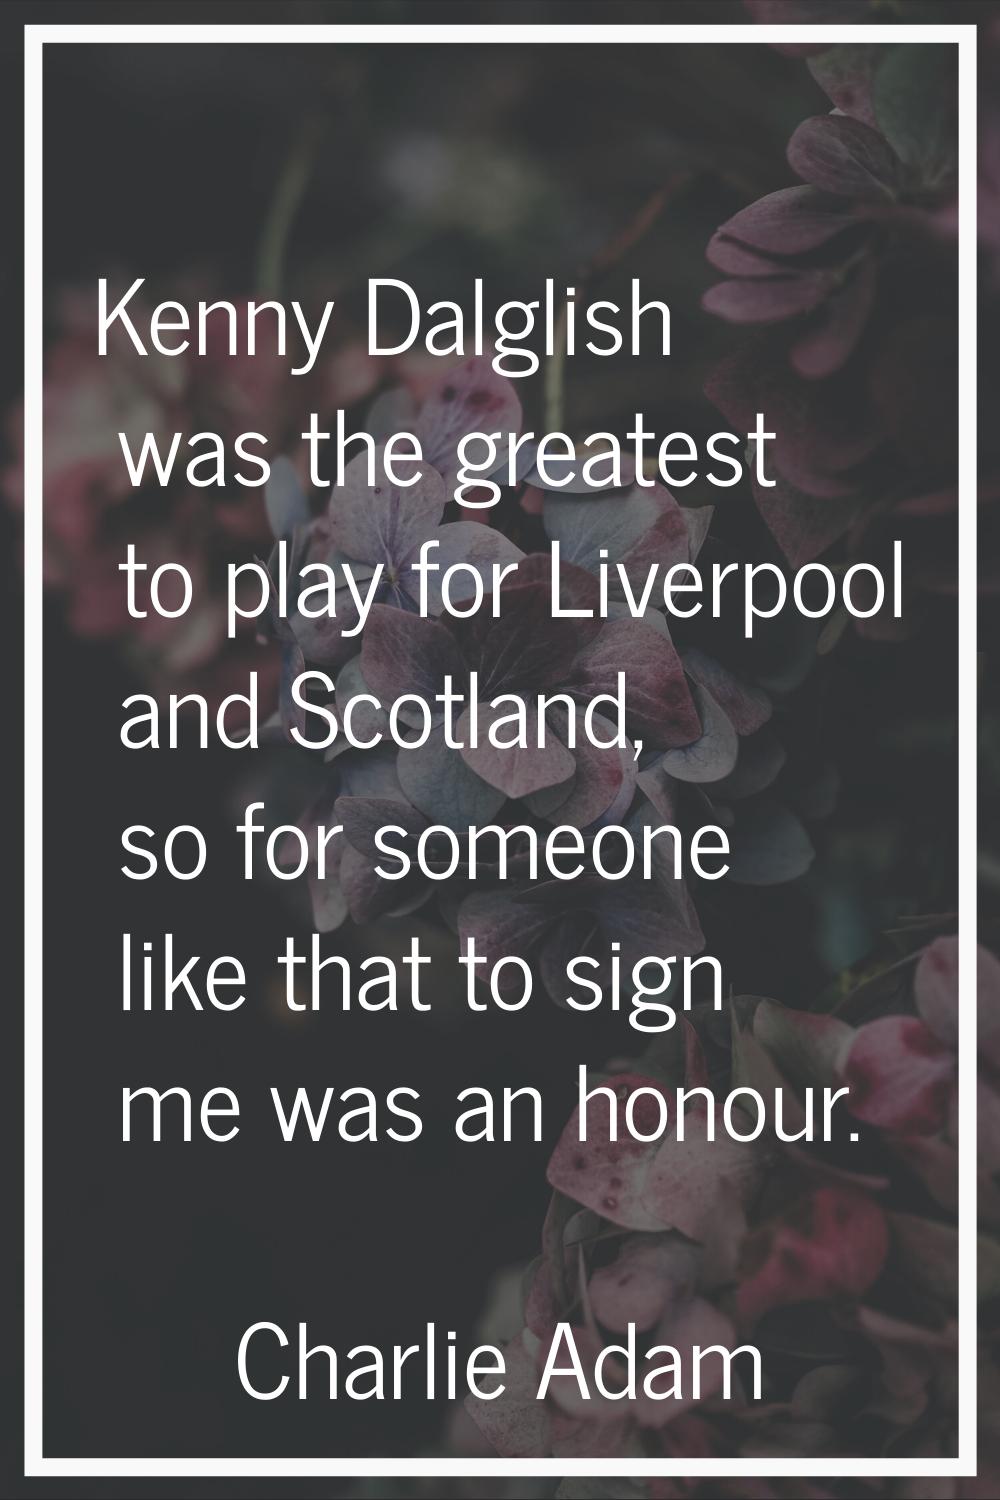 Kenny Dalglish was the greatest to play for Liverpool and Scotland, so for someone like that to sig